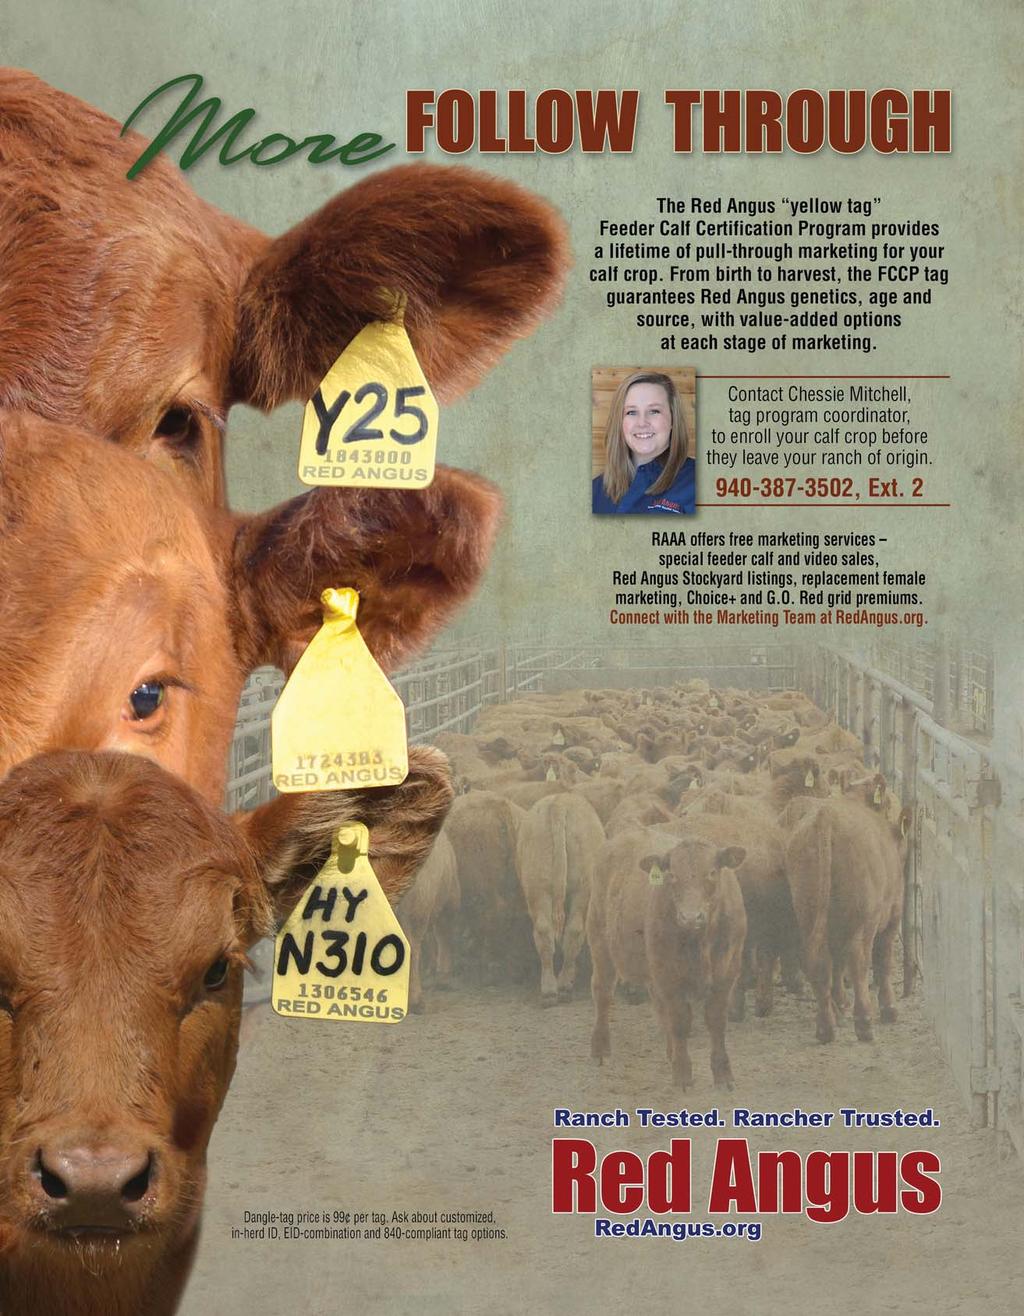 Reference Sires Catalog and video online at